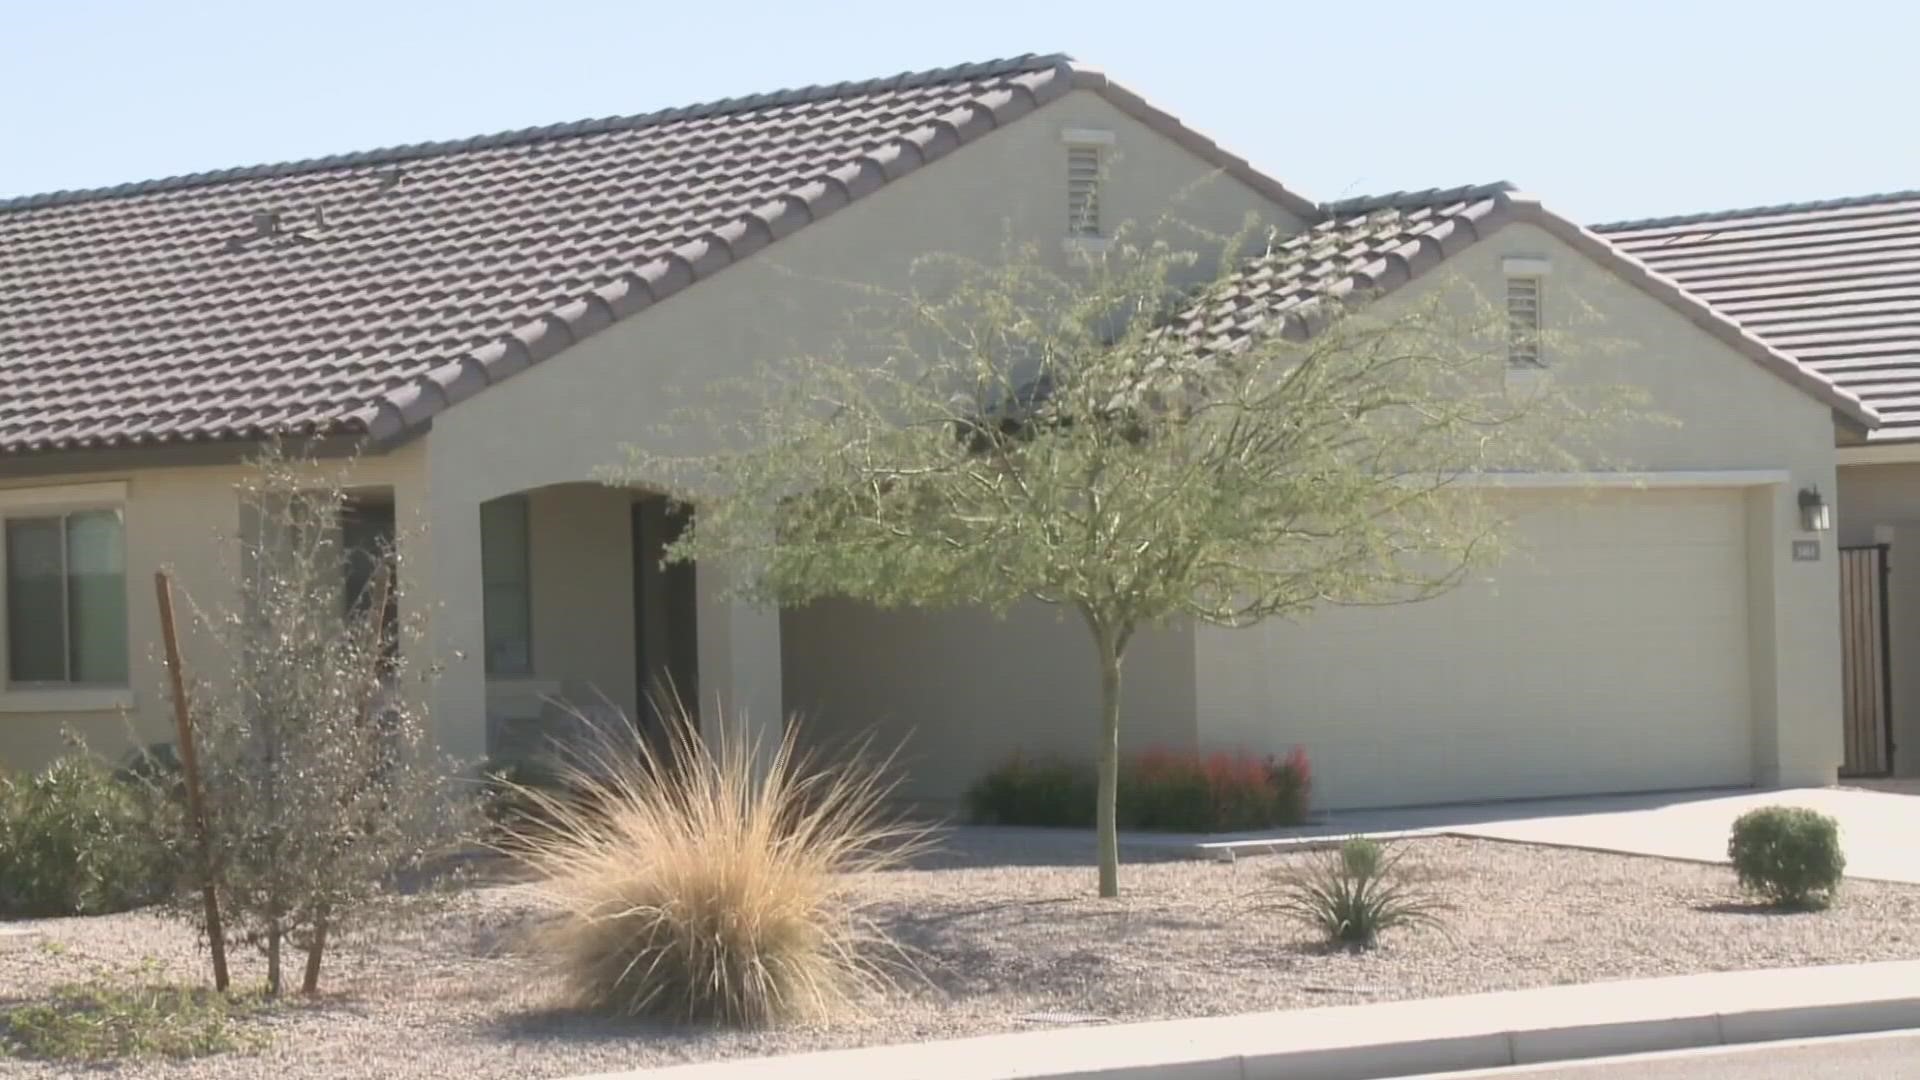 The City of Tempe will start accepting applications for its Section 8 housing vouchers on Feb. 28. The city will add 3,000 households to its voucher waitlist.